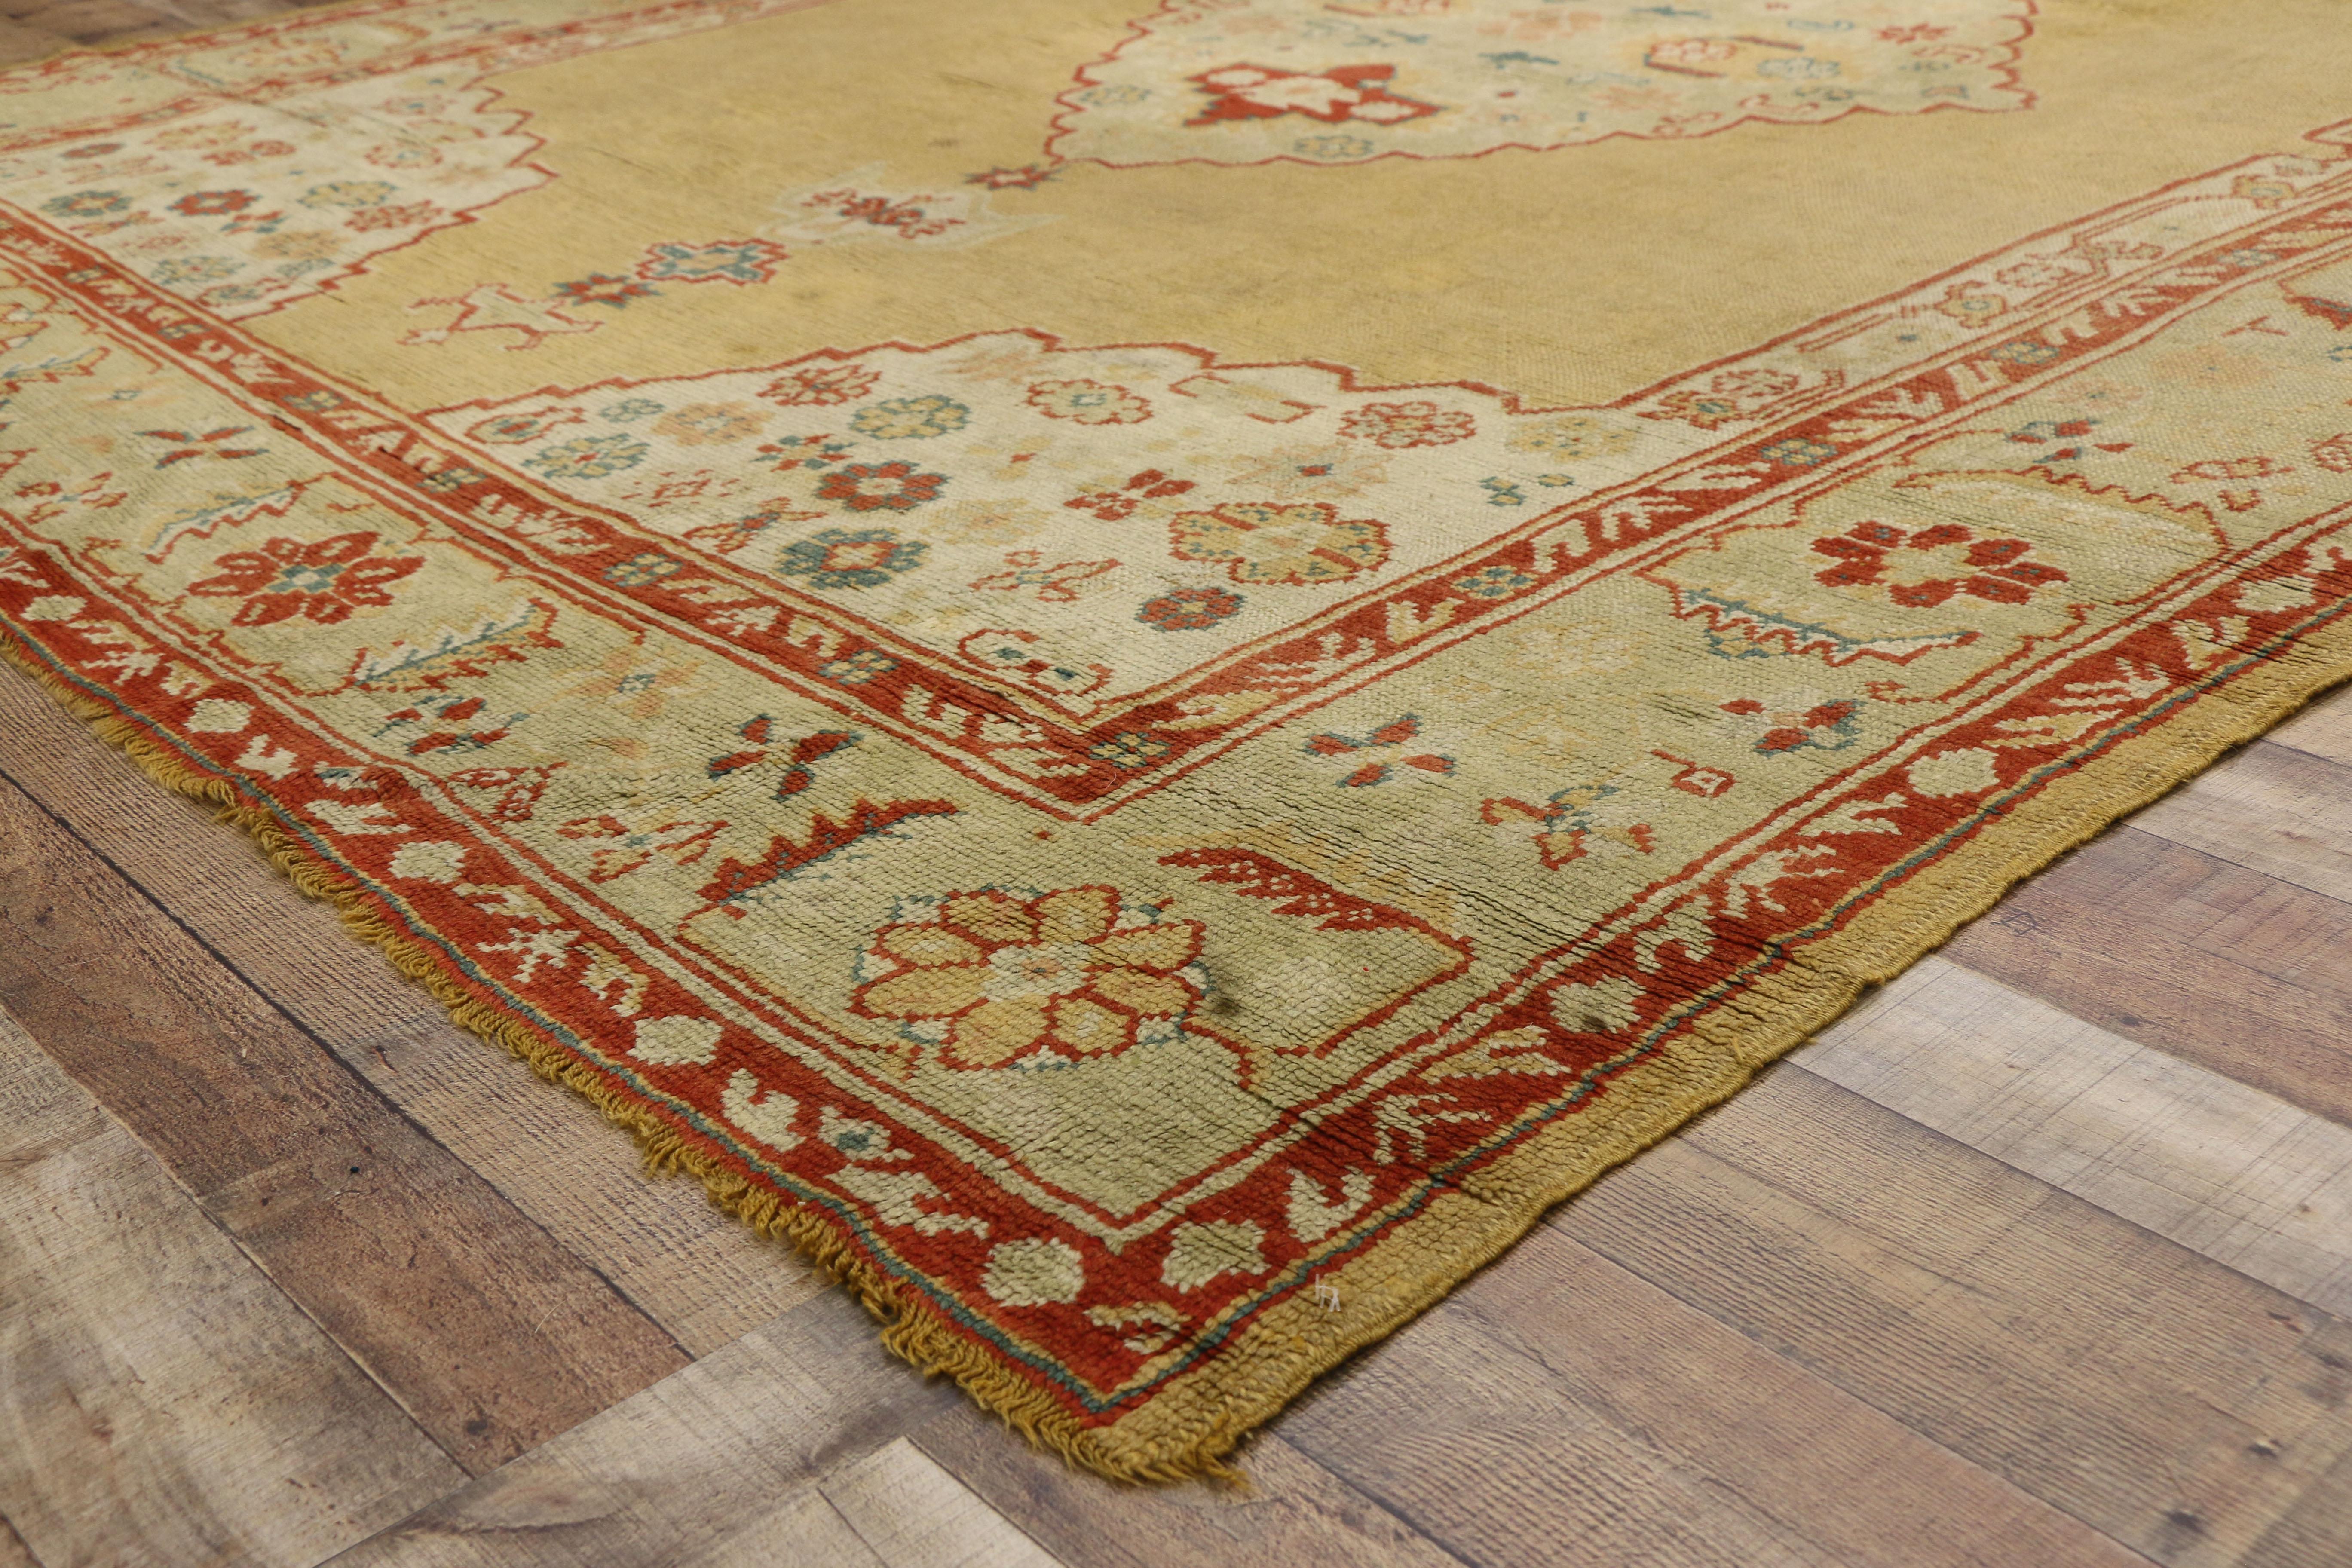 Wool Antique Gold Turkish Oushak Rug, 09'03 x 11'10 For Sale